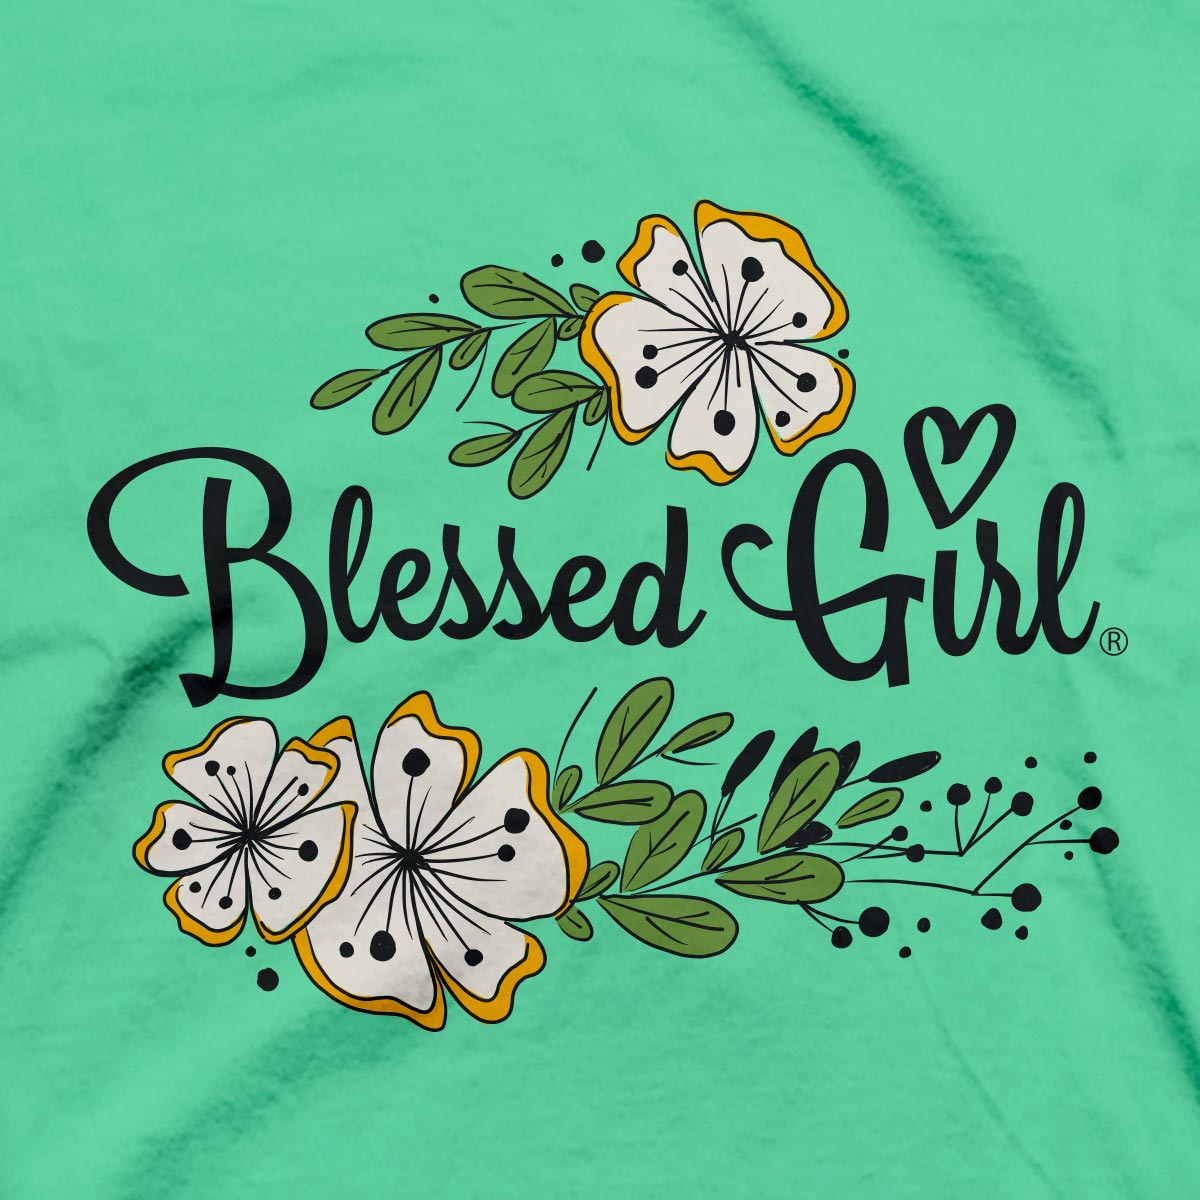 Blessed Girl Womens T-Shirt Bee Strong